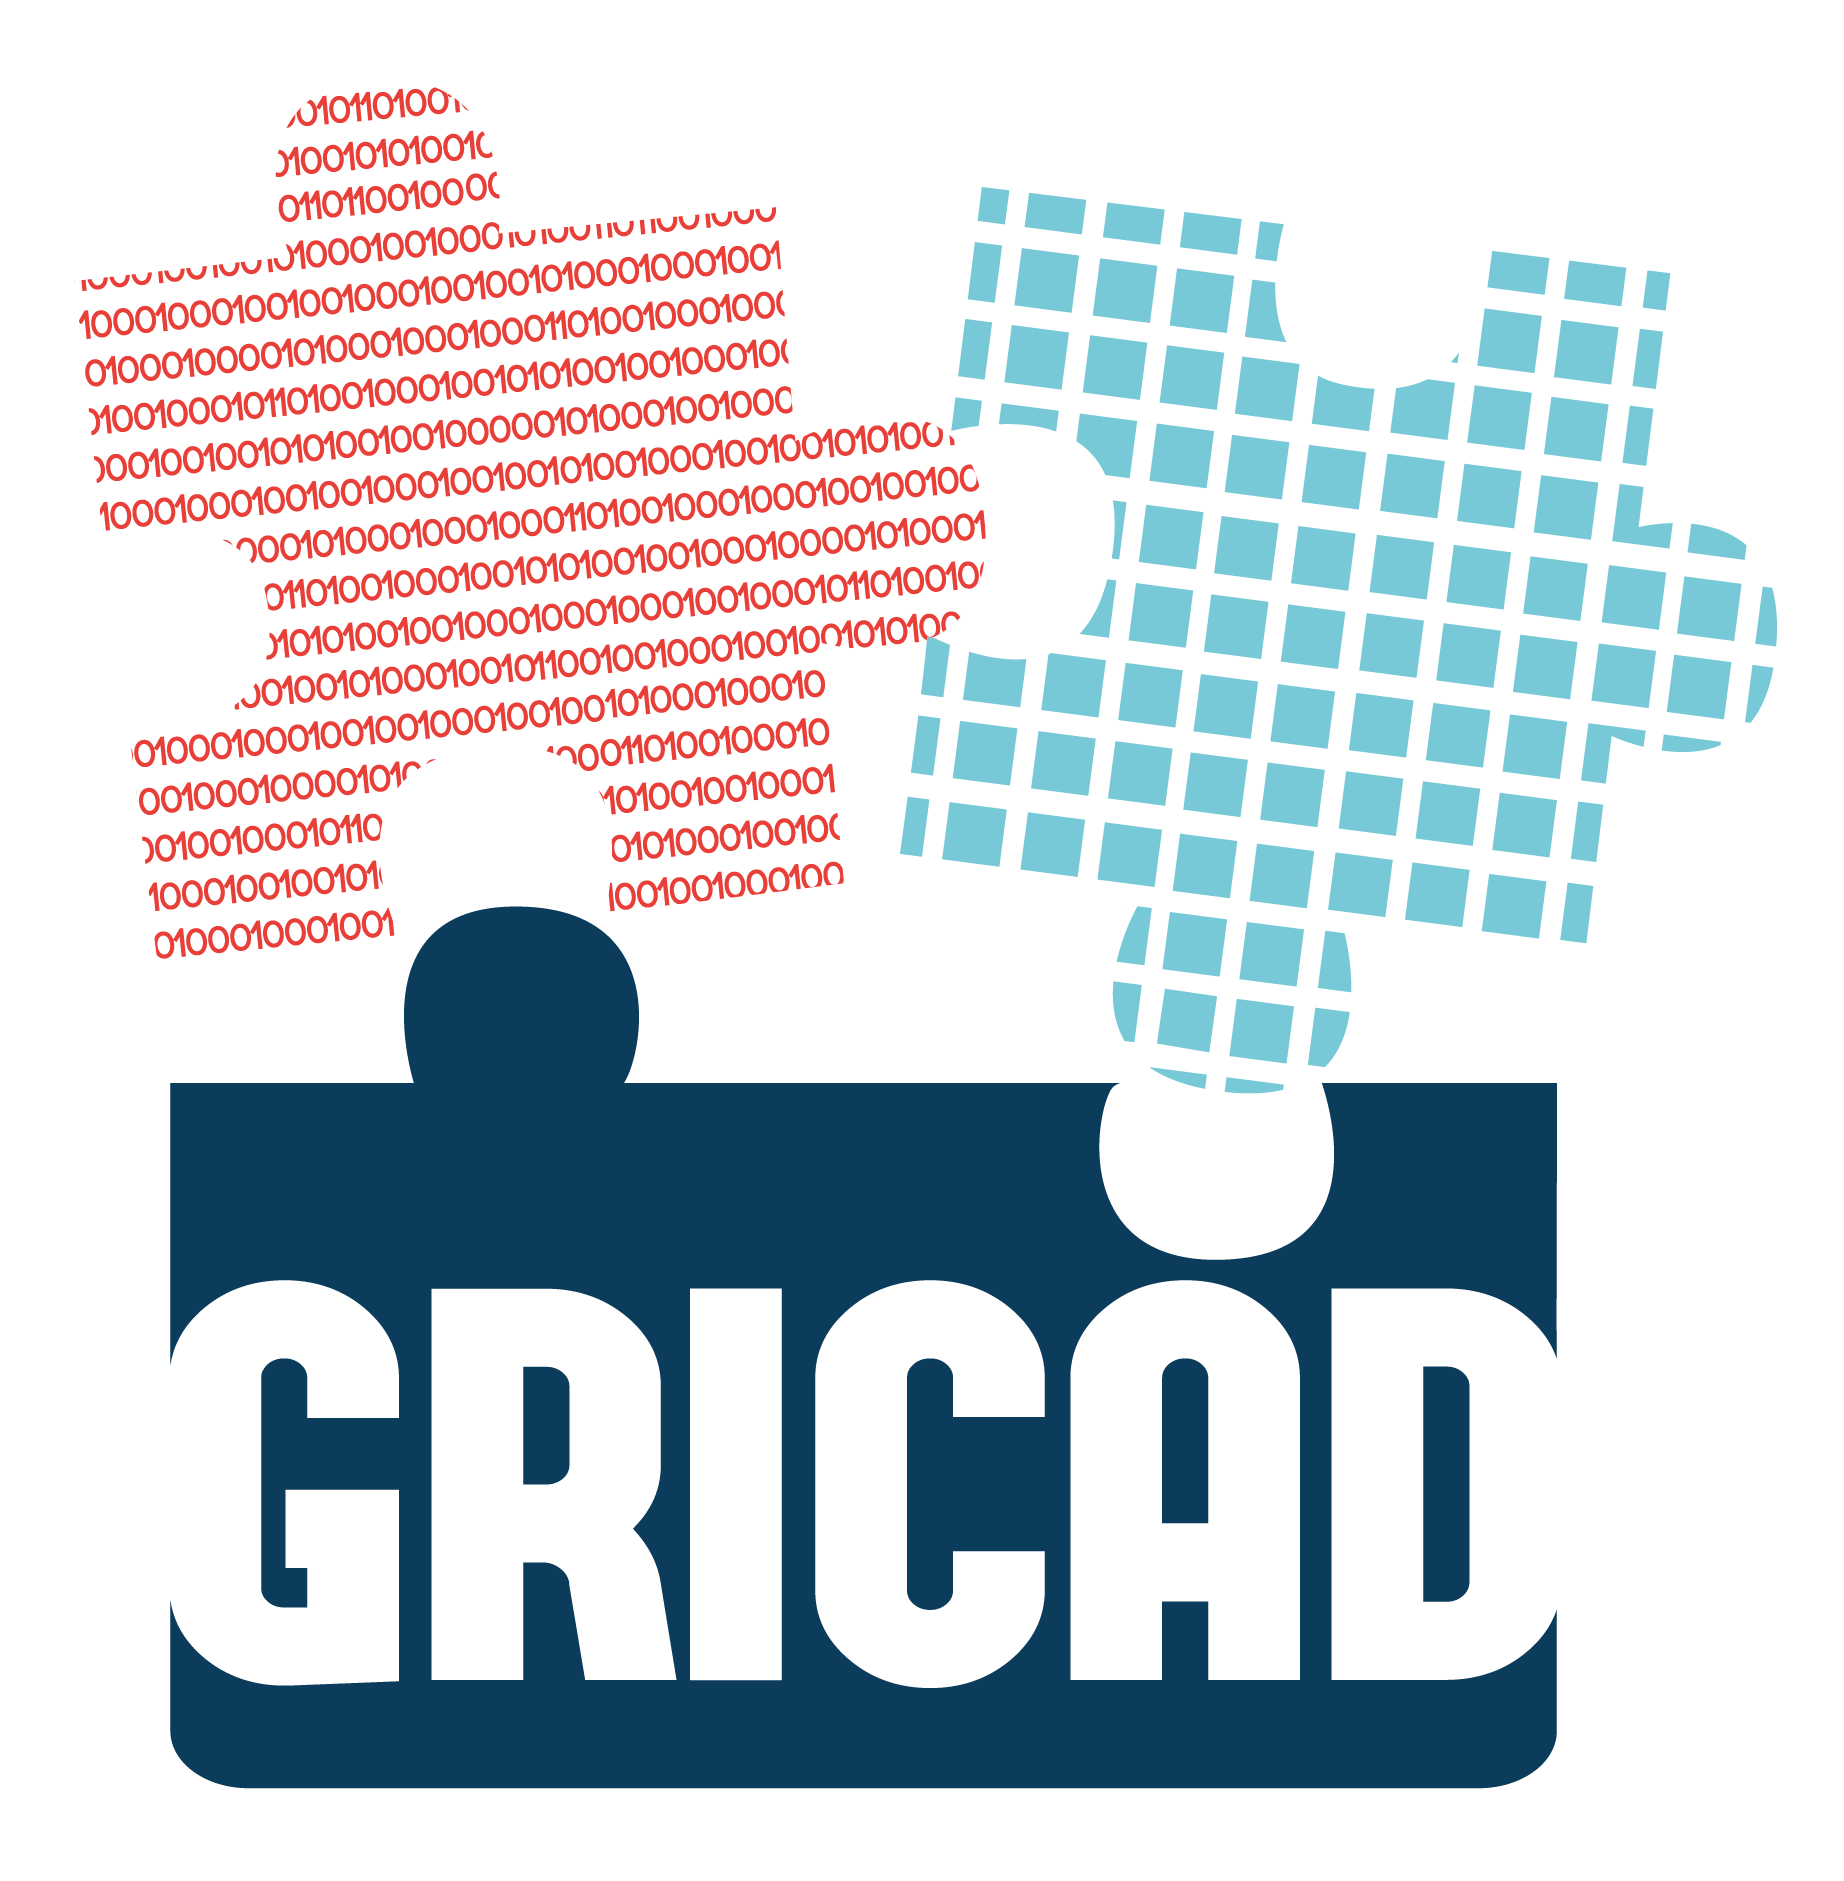 GRICAD